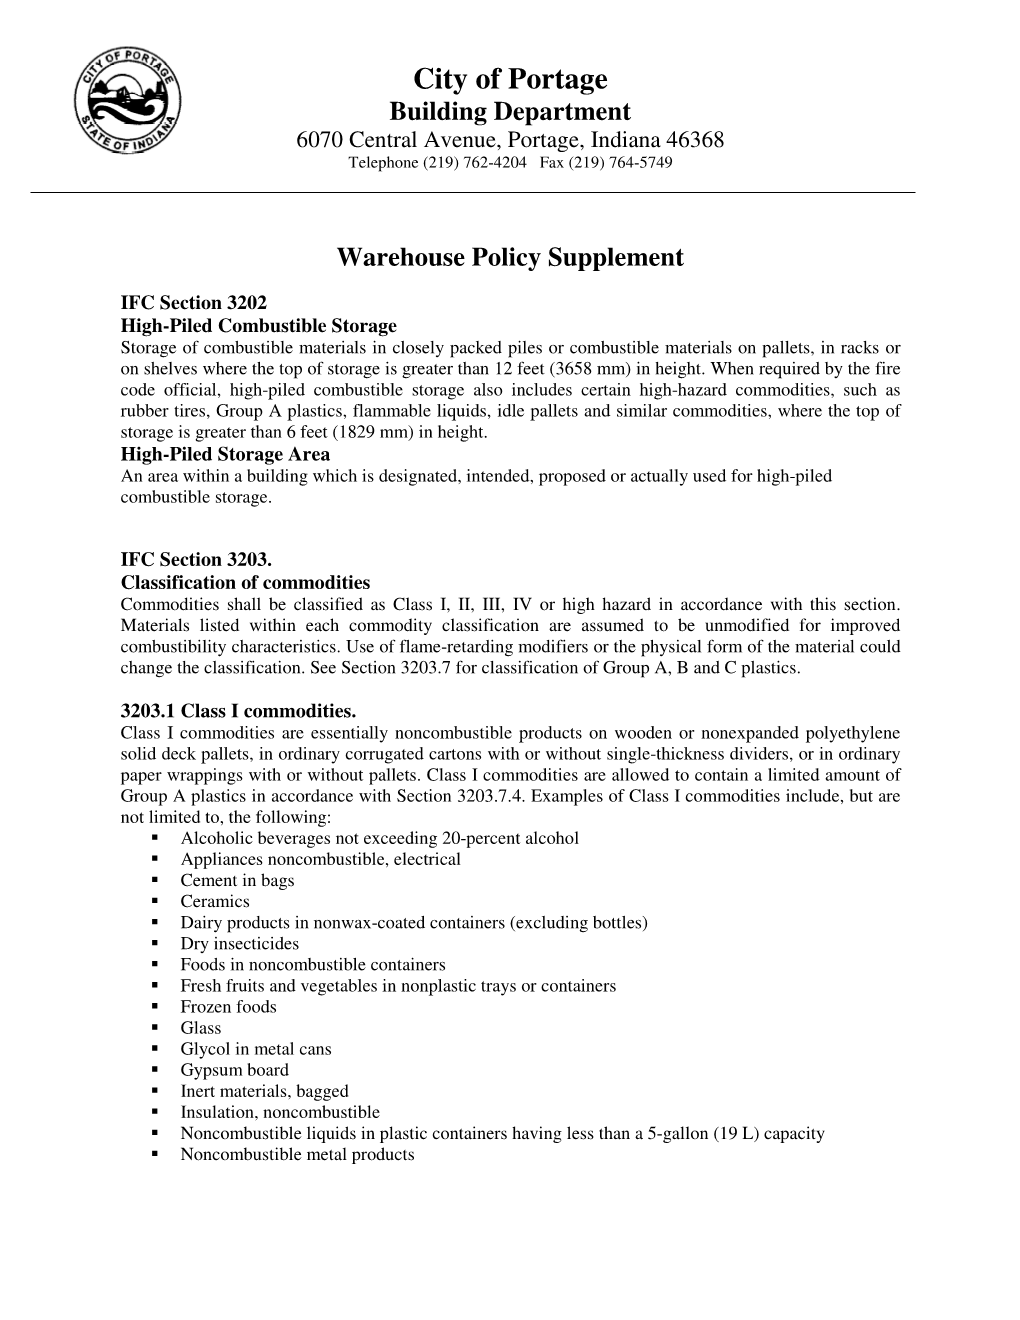 Warehouse Policy Supplement